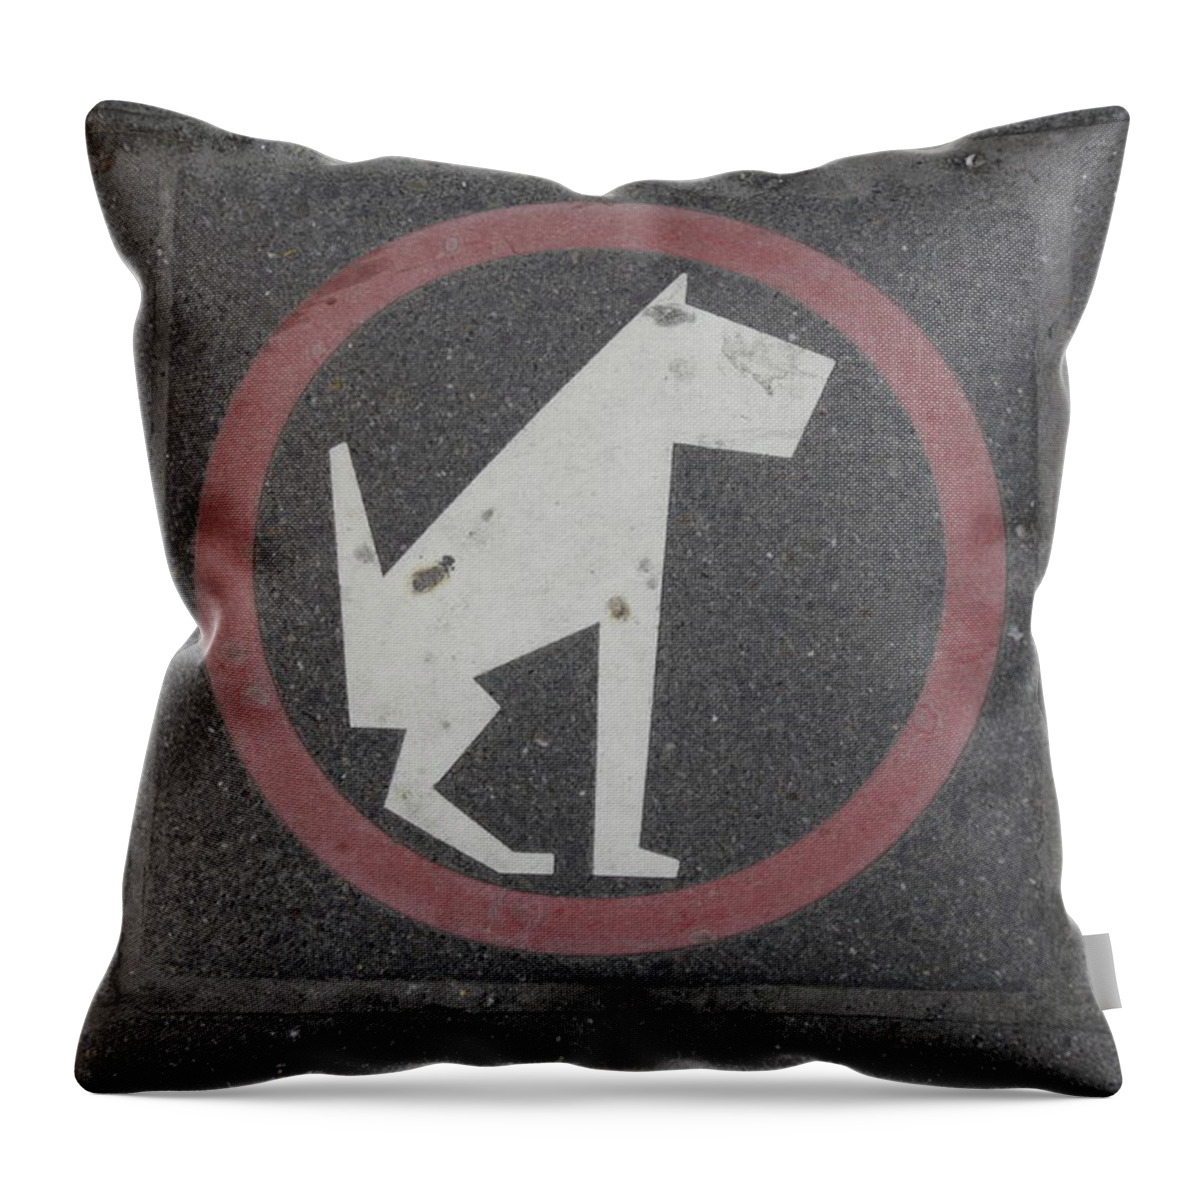 Sidewalk Throw Pillow featuring the photograph Allowed in Designated Area by Donato Iannuzzi